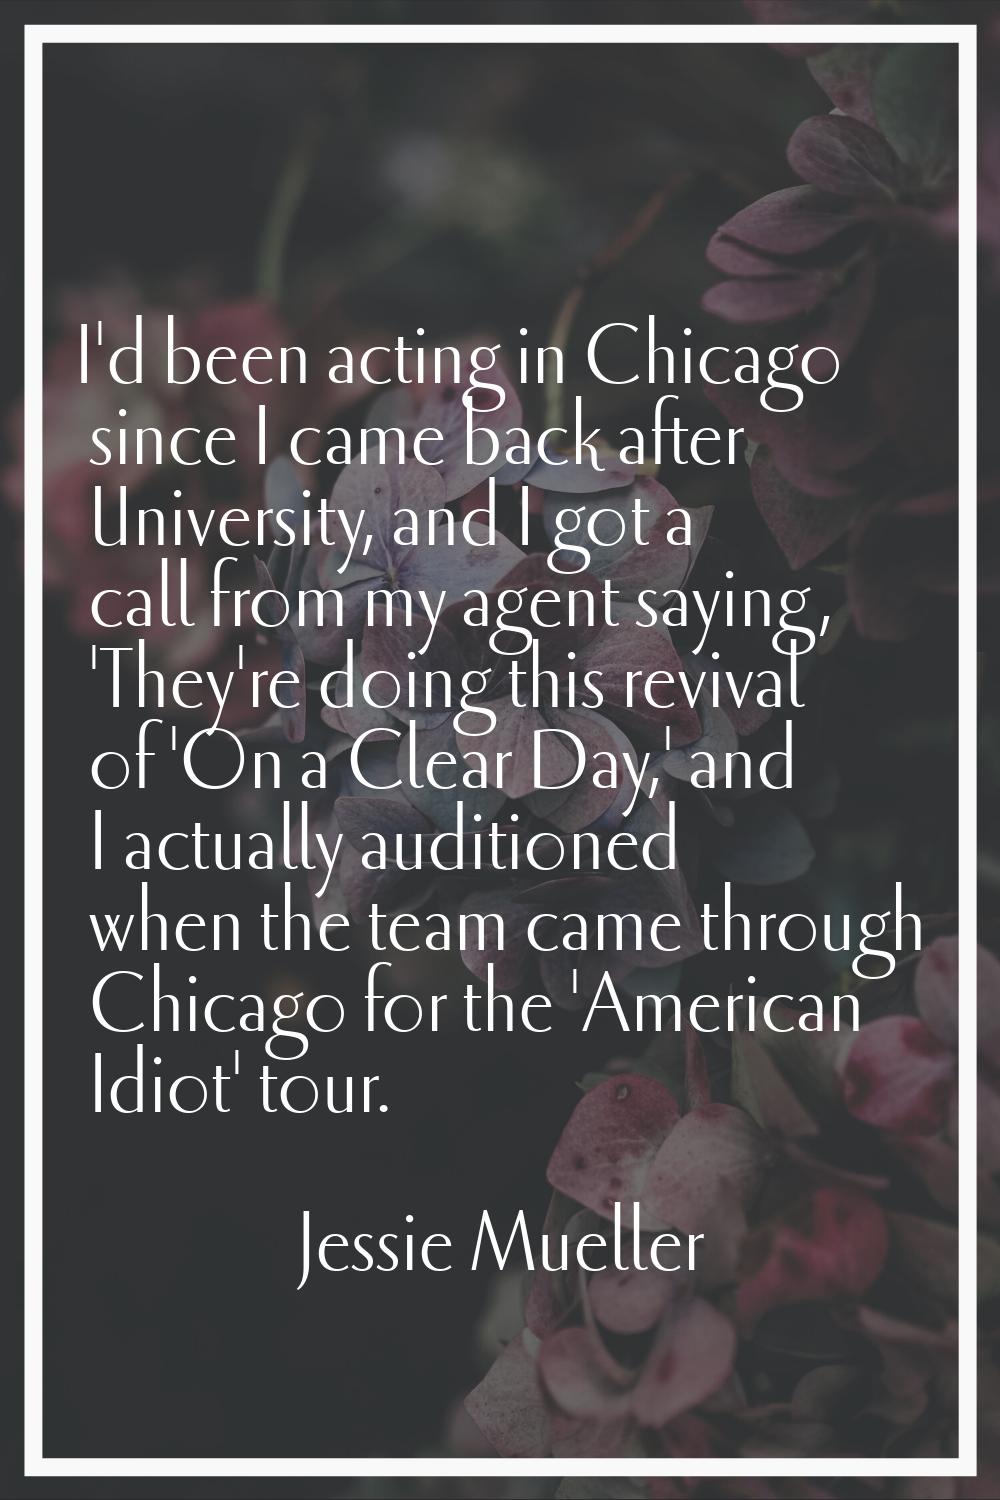 I'd been acting in Chicago since I came back after University, and I got a call from my agent sayin